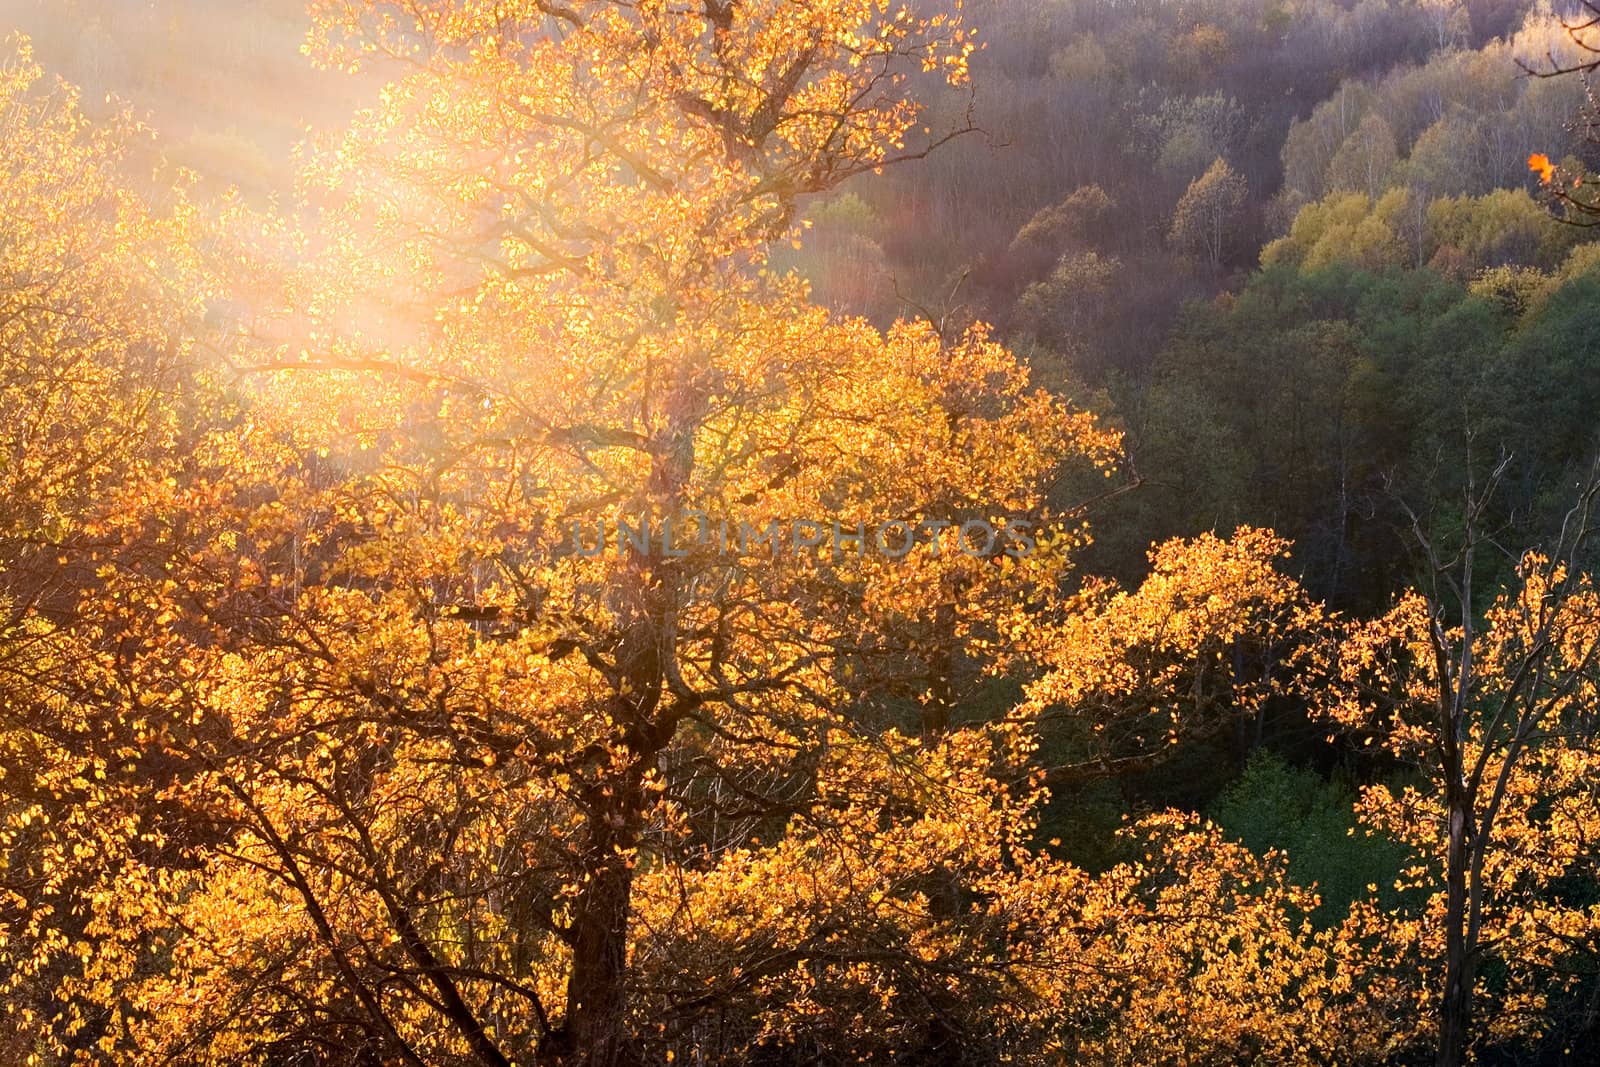 Autumn trees with yellow foliage  in sunlight